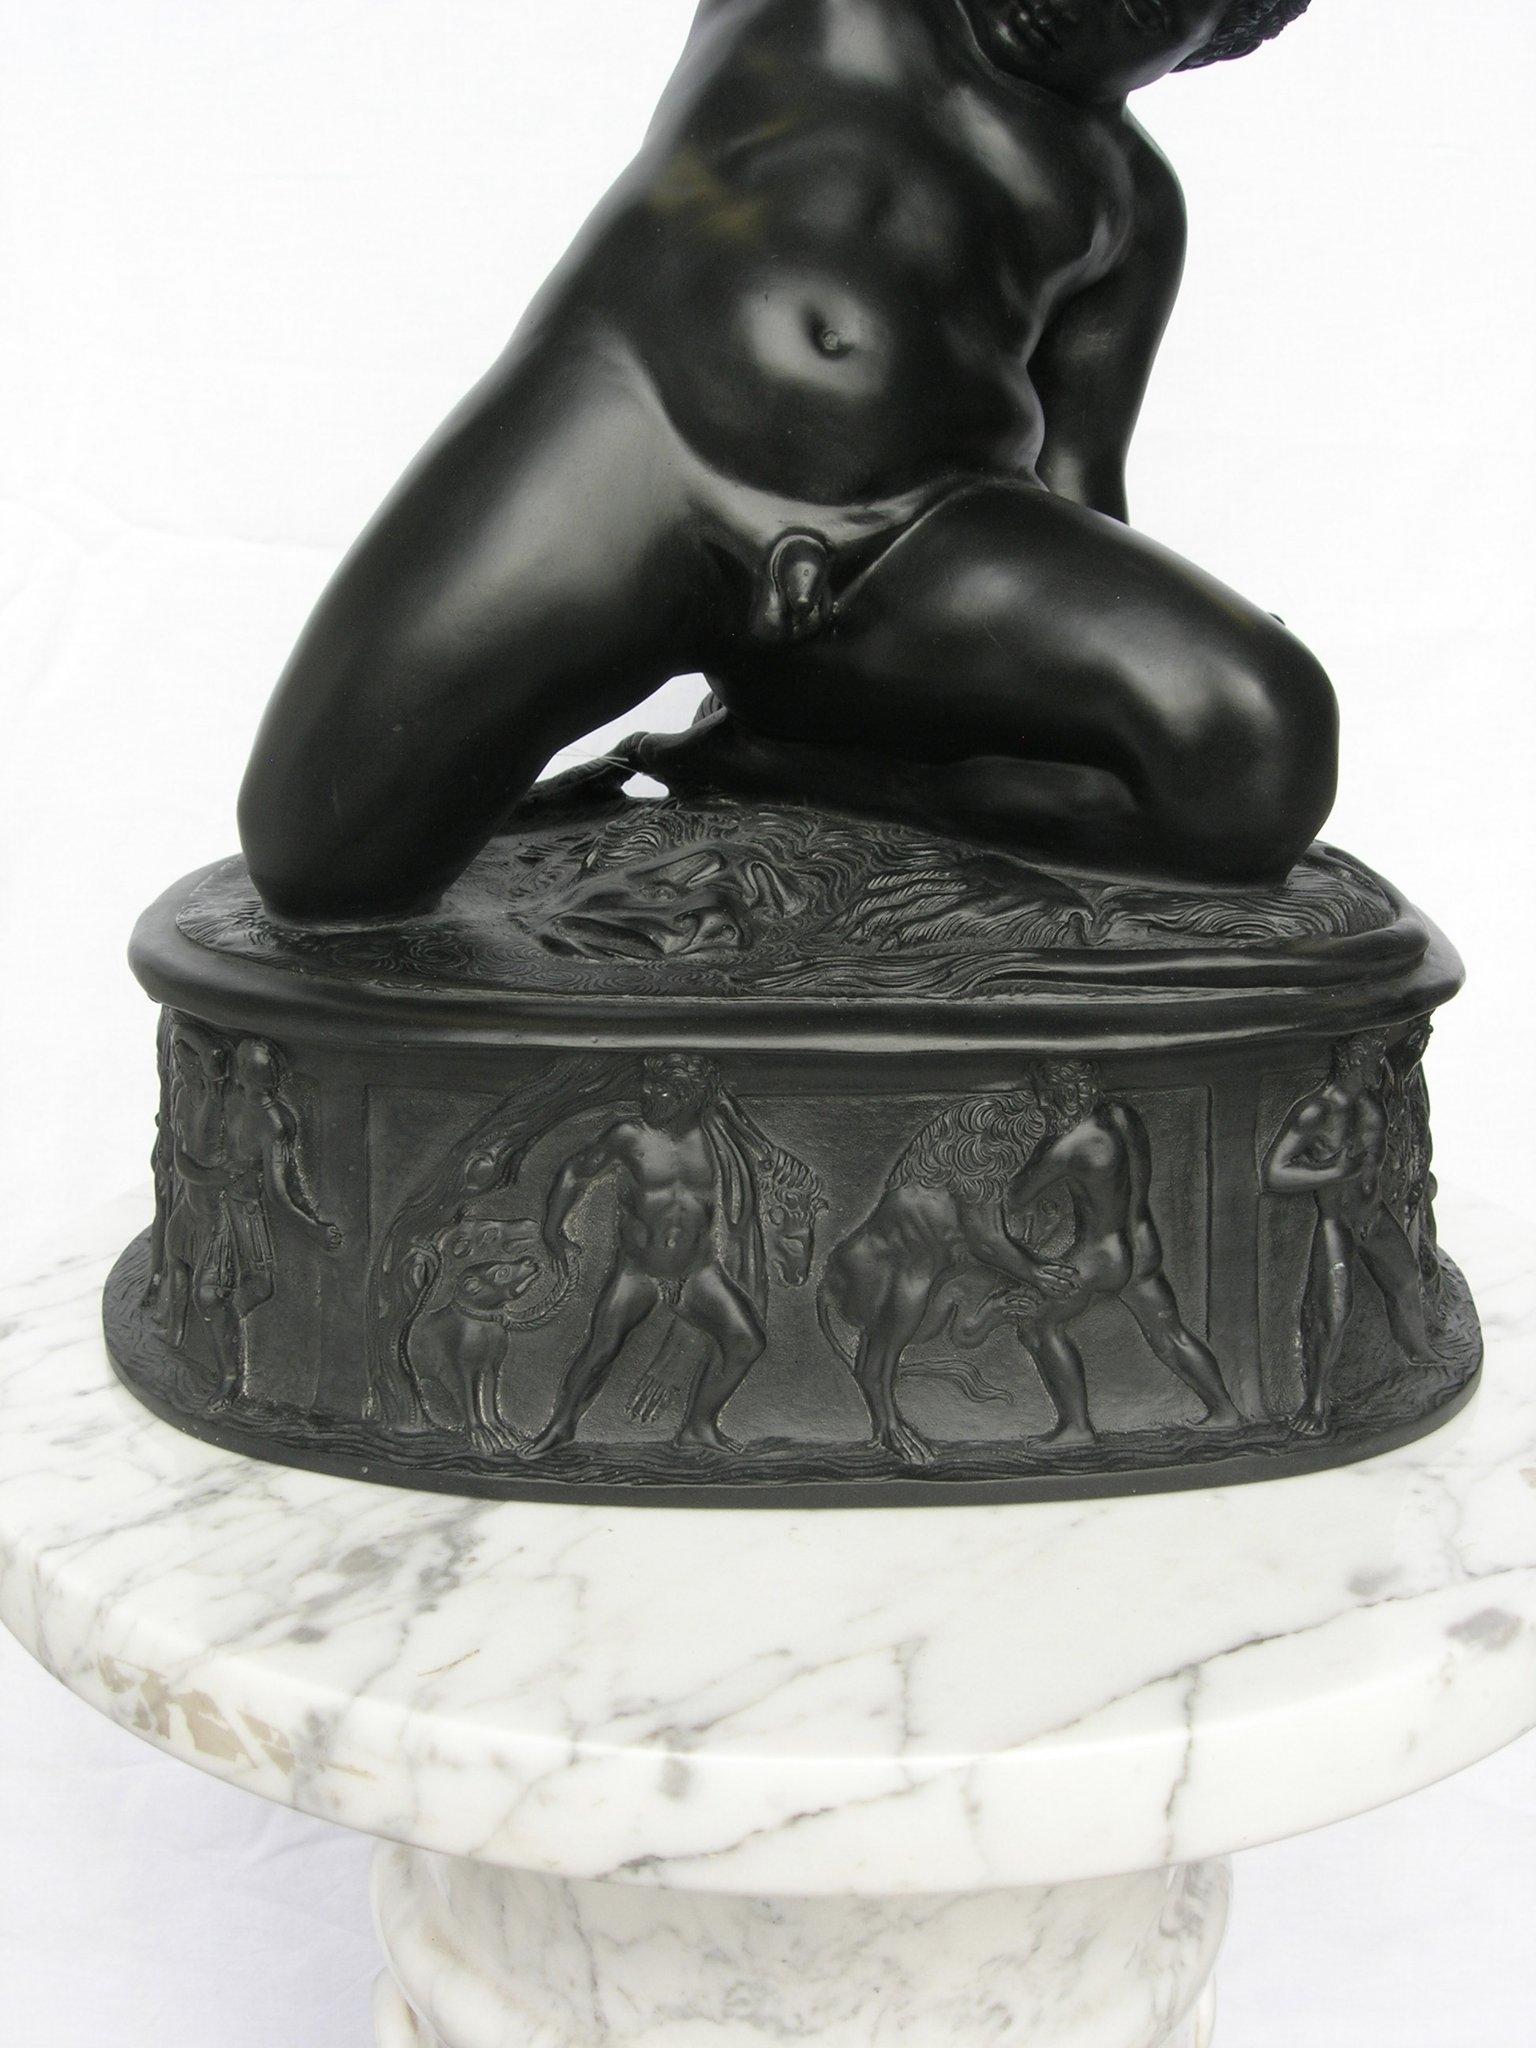 The Young Hercules, Basalt Black Marble Sculpture, 20th Century In Excellent Condition For Sale In London, GB